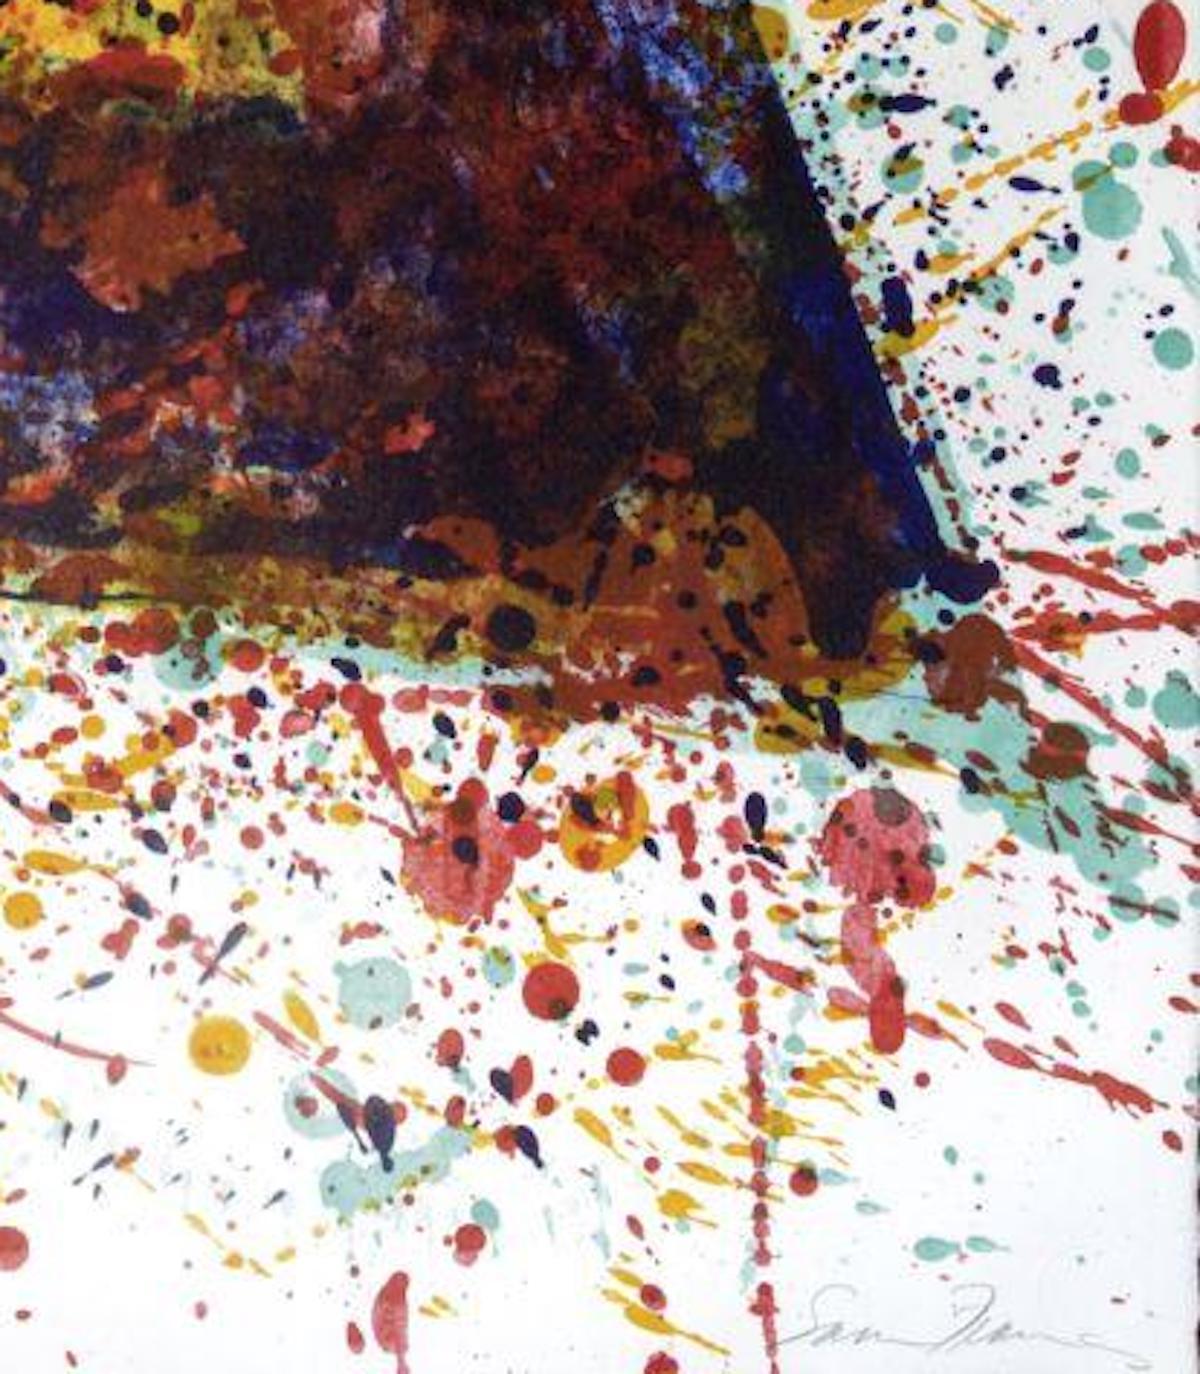 Untitled is an original contemporary artwork realized by Sam Francis in 1976.

Color Lithograph on BFK Rives. 

Publisher The Litho Shop Santa Monica.

Ref. SF-220; Lembmark L.207

Hand signed in pencil by the artist

Edition of 19/20. Numbered on